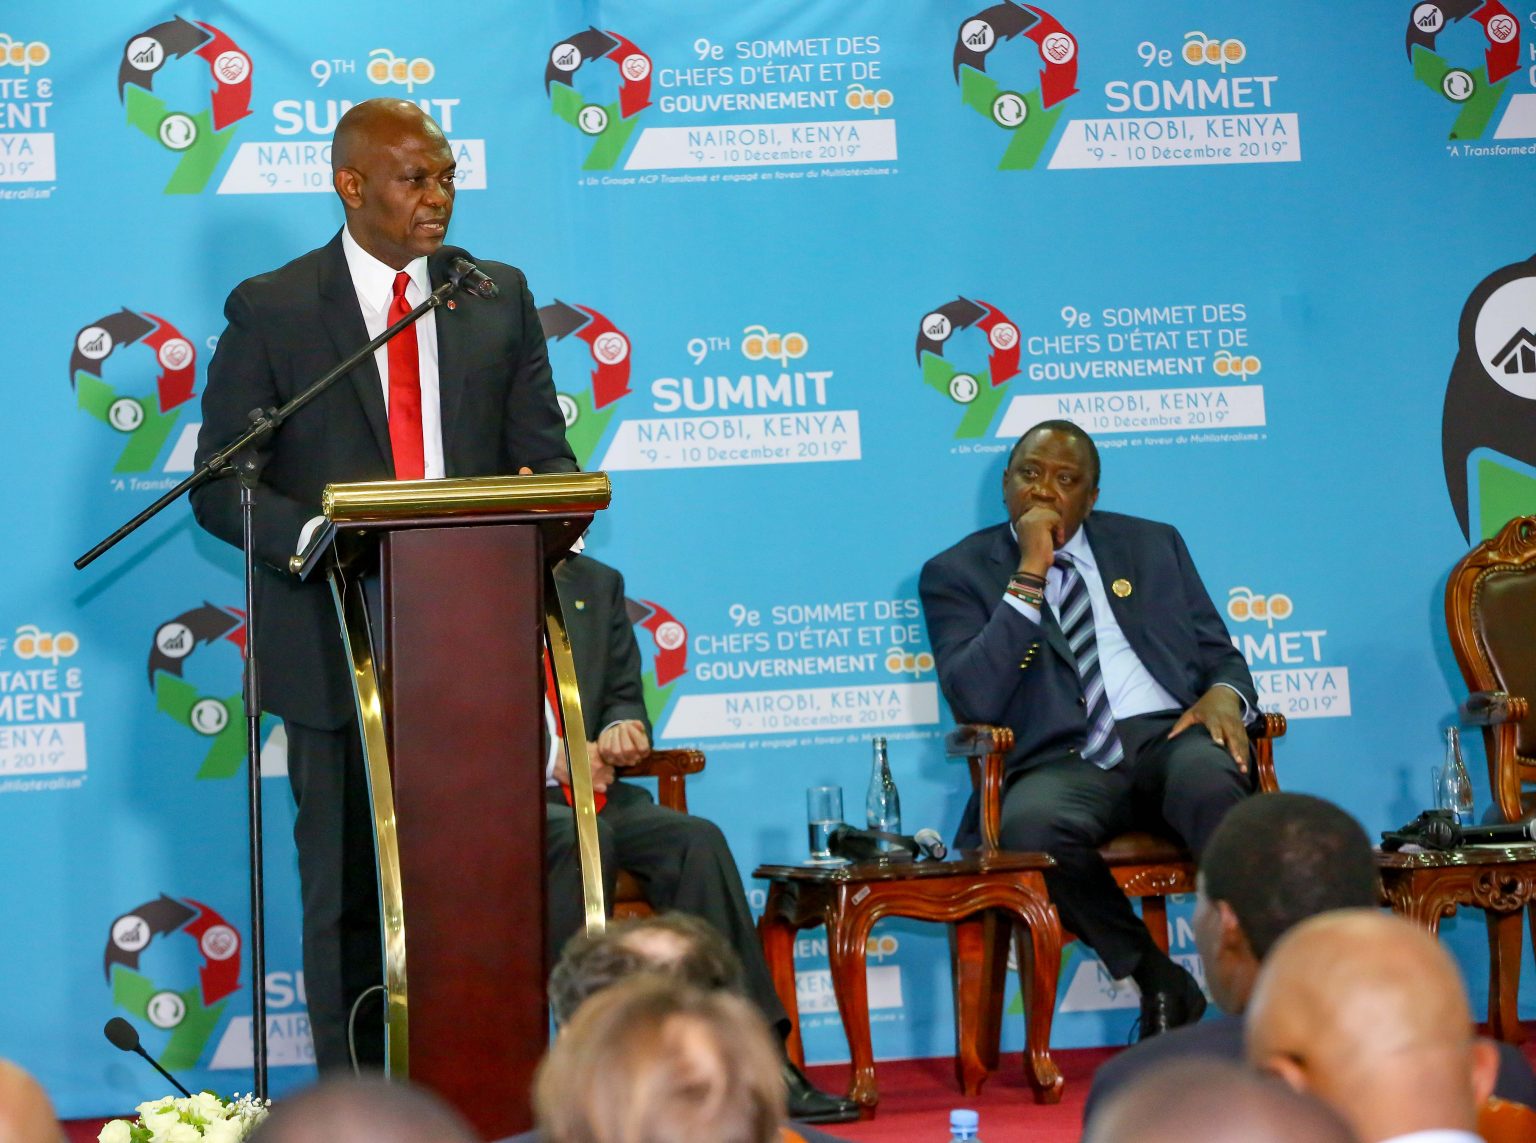 Tony Elumelu, the Founder of the Tony Elumelu Foundation, has urged African, Caribbean and Pacific (ACP) Heads of State to improve the business environment in their countries in order to drive industrialisation and wealth creation.